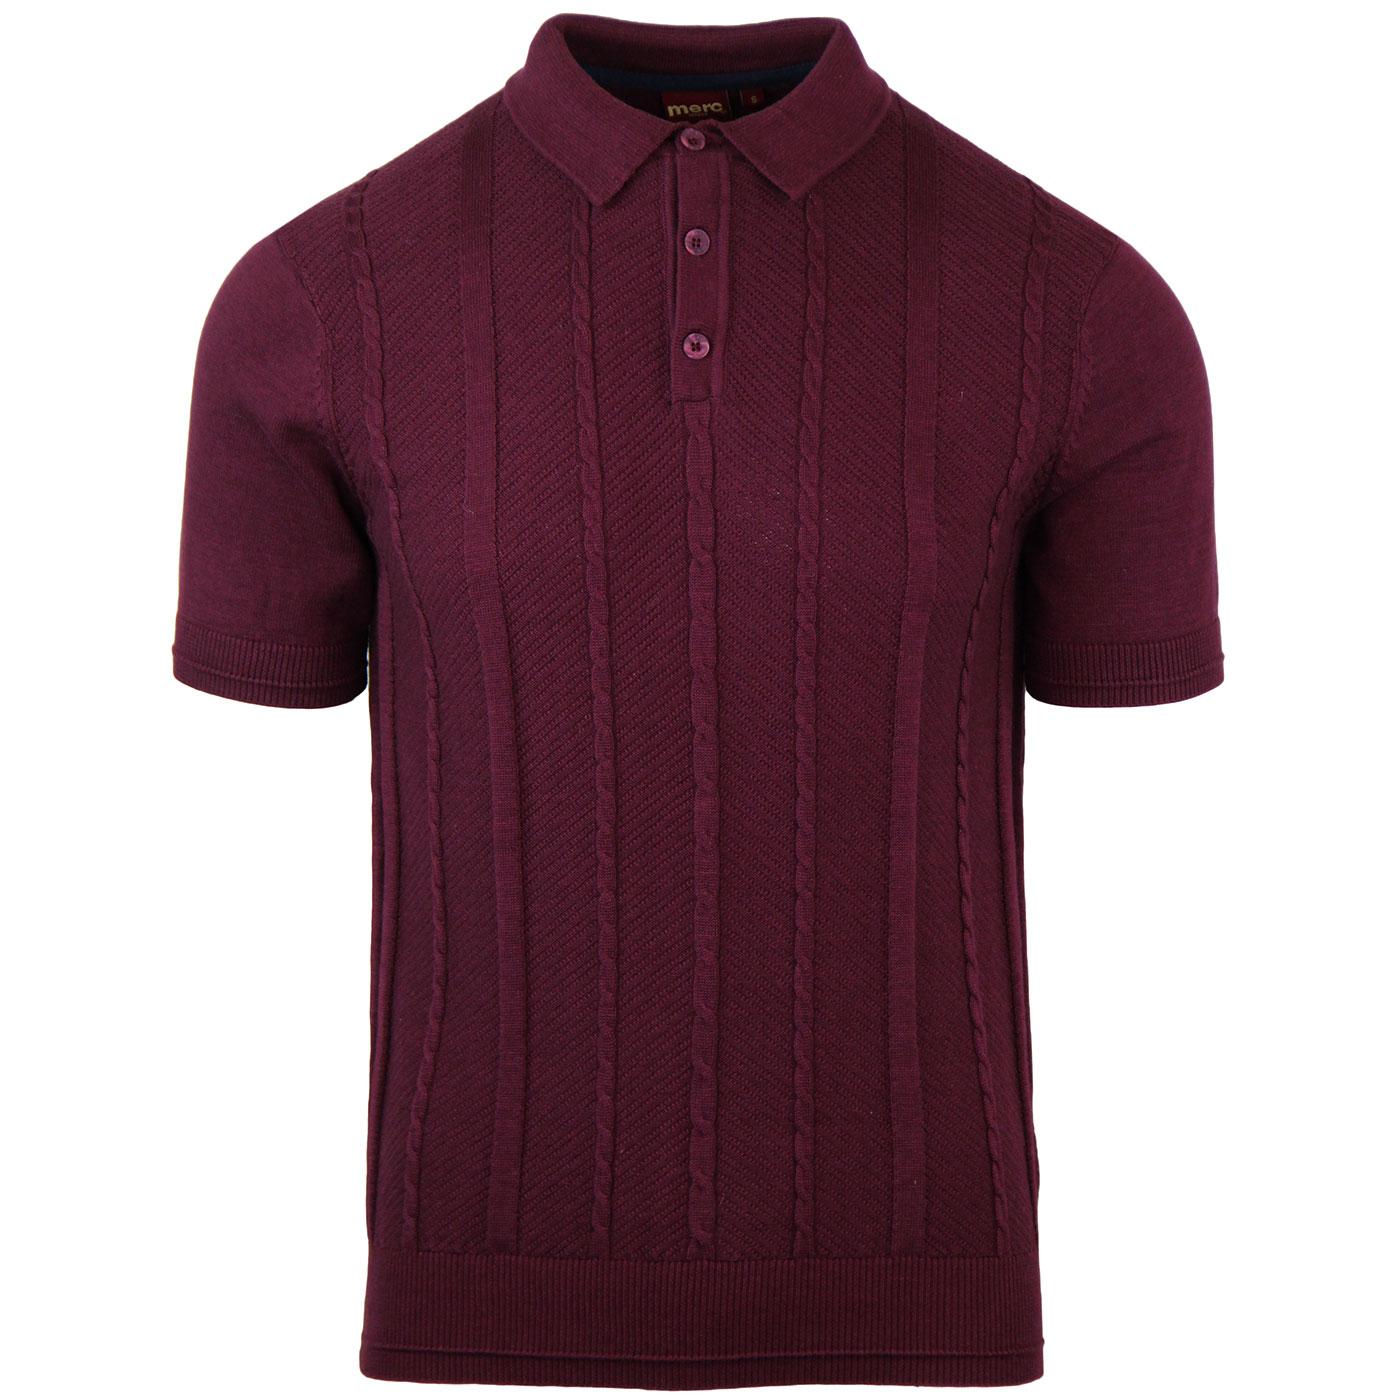 cable knit polo shirt,Free delivery,zwh.com.pk